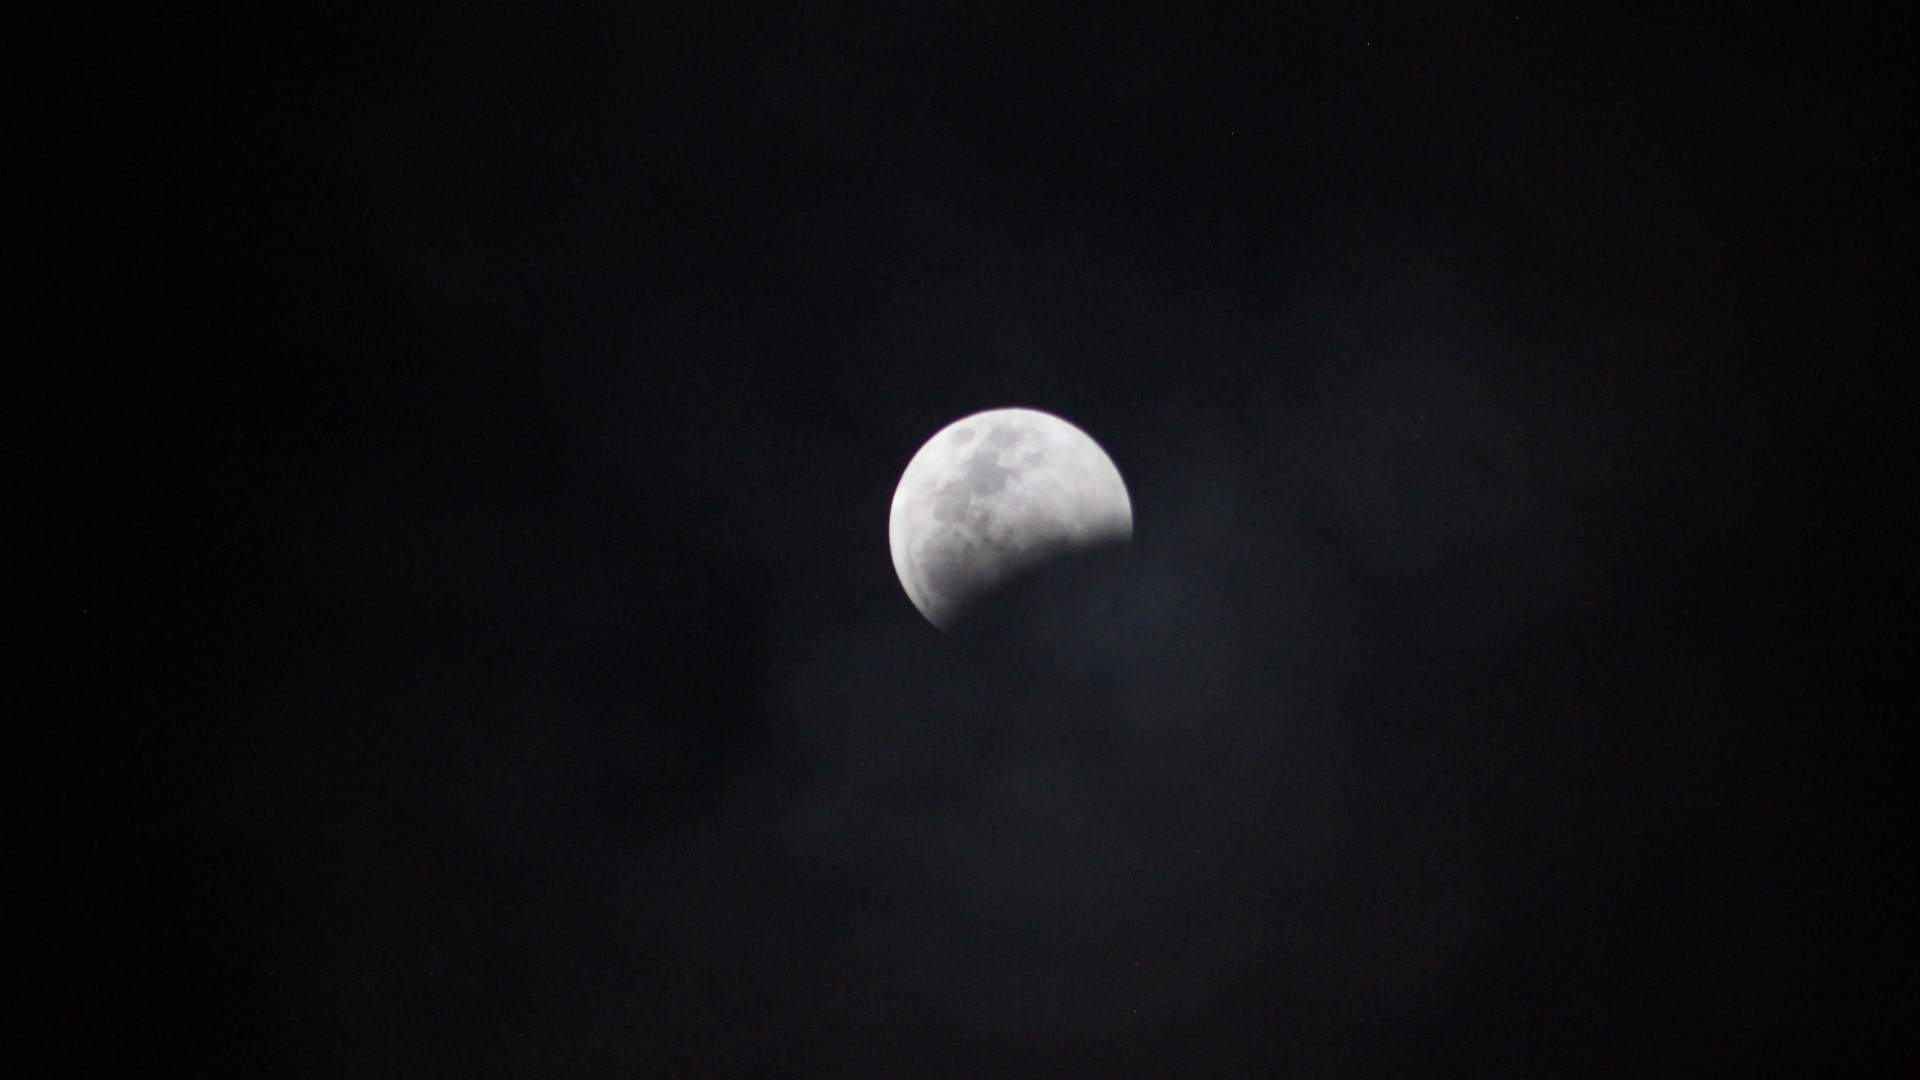 A Lunar Eclipse Will Be Visible in New Zealand This Weekend